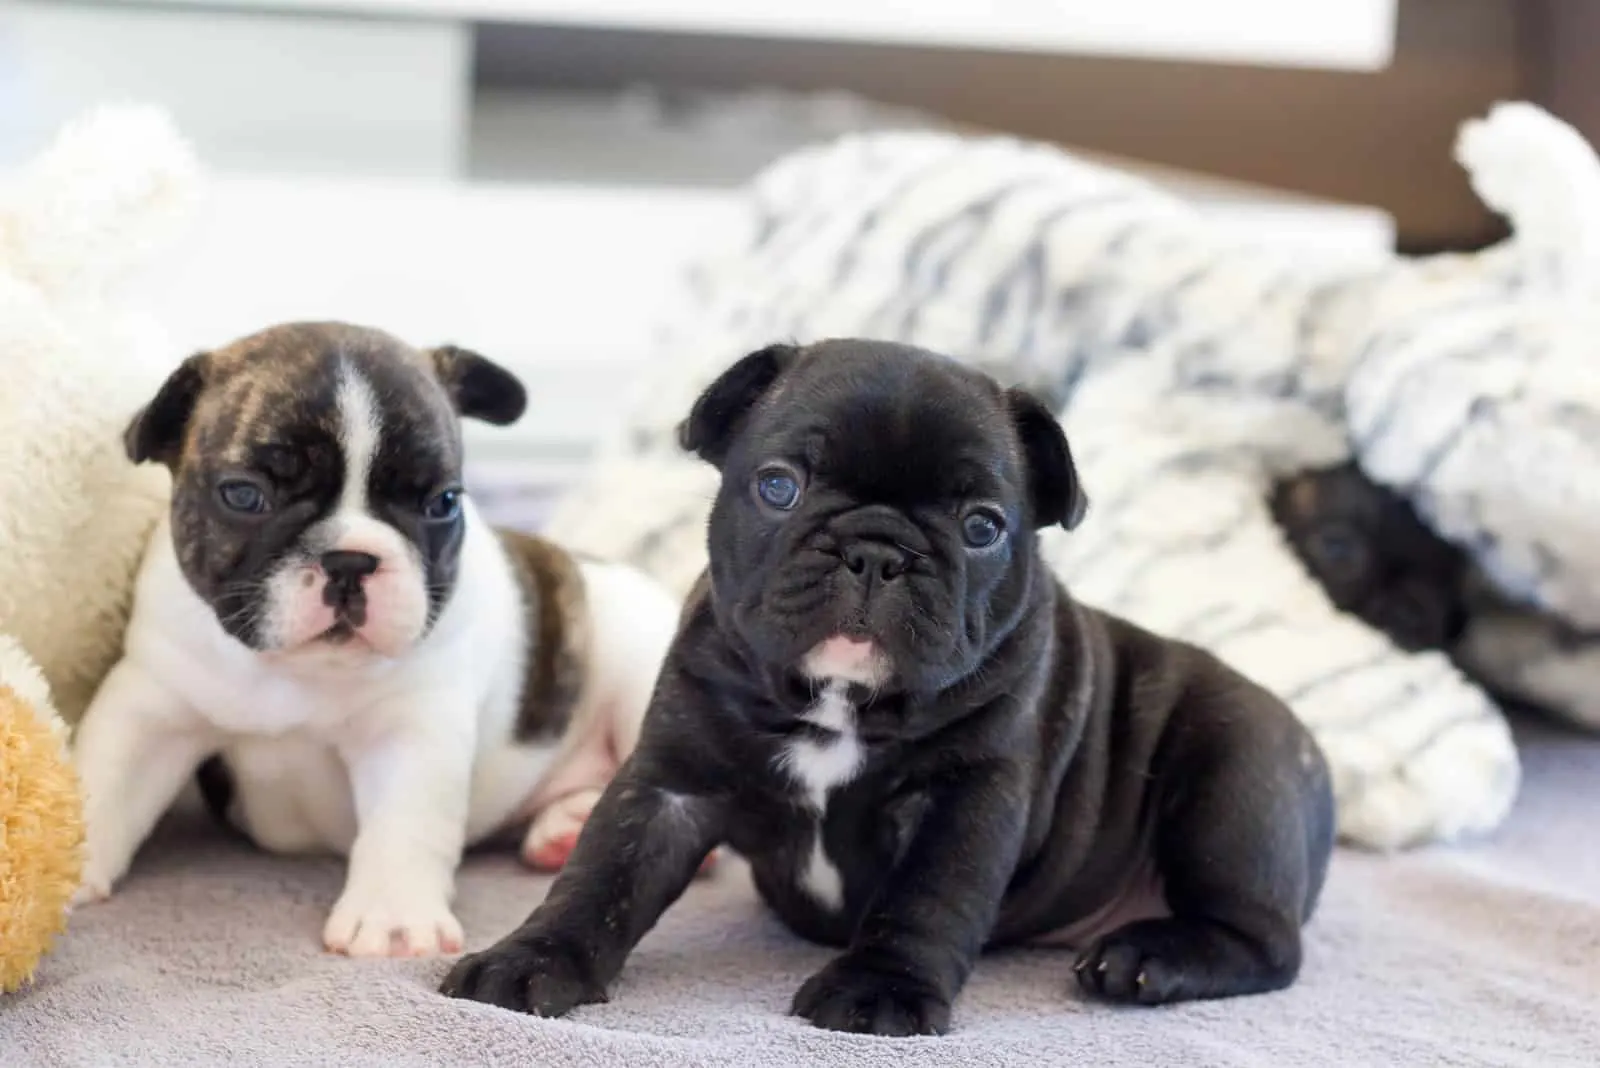 two adorable puppies of a French bulldog sitting on the bed